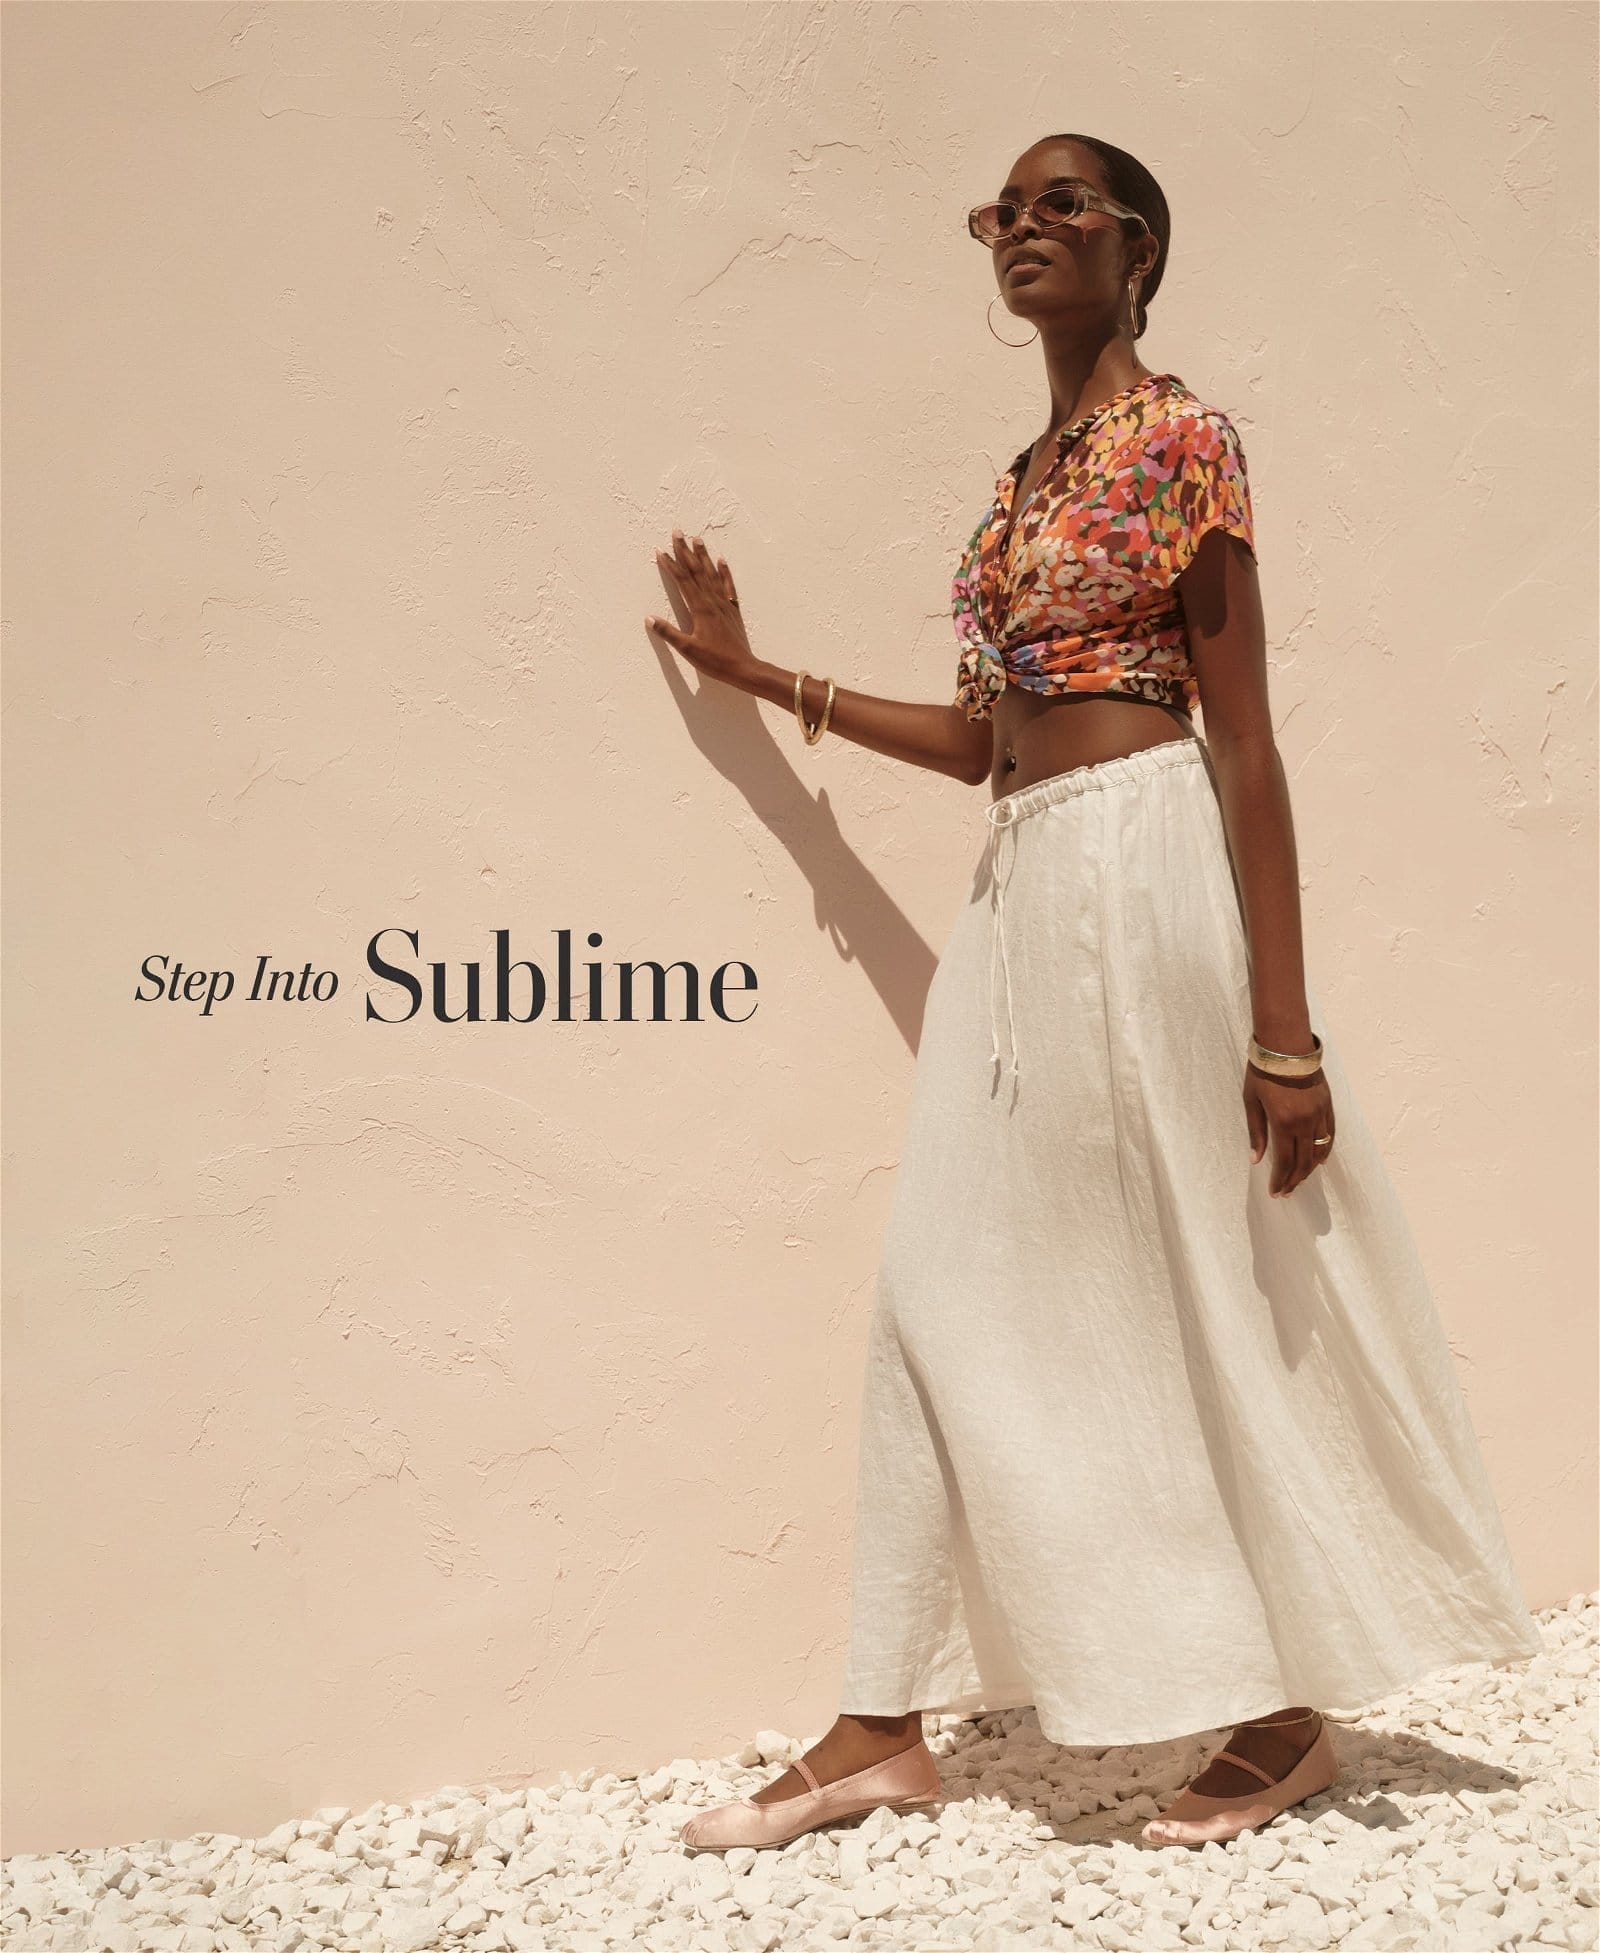 Step Into Sublime